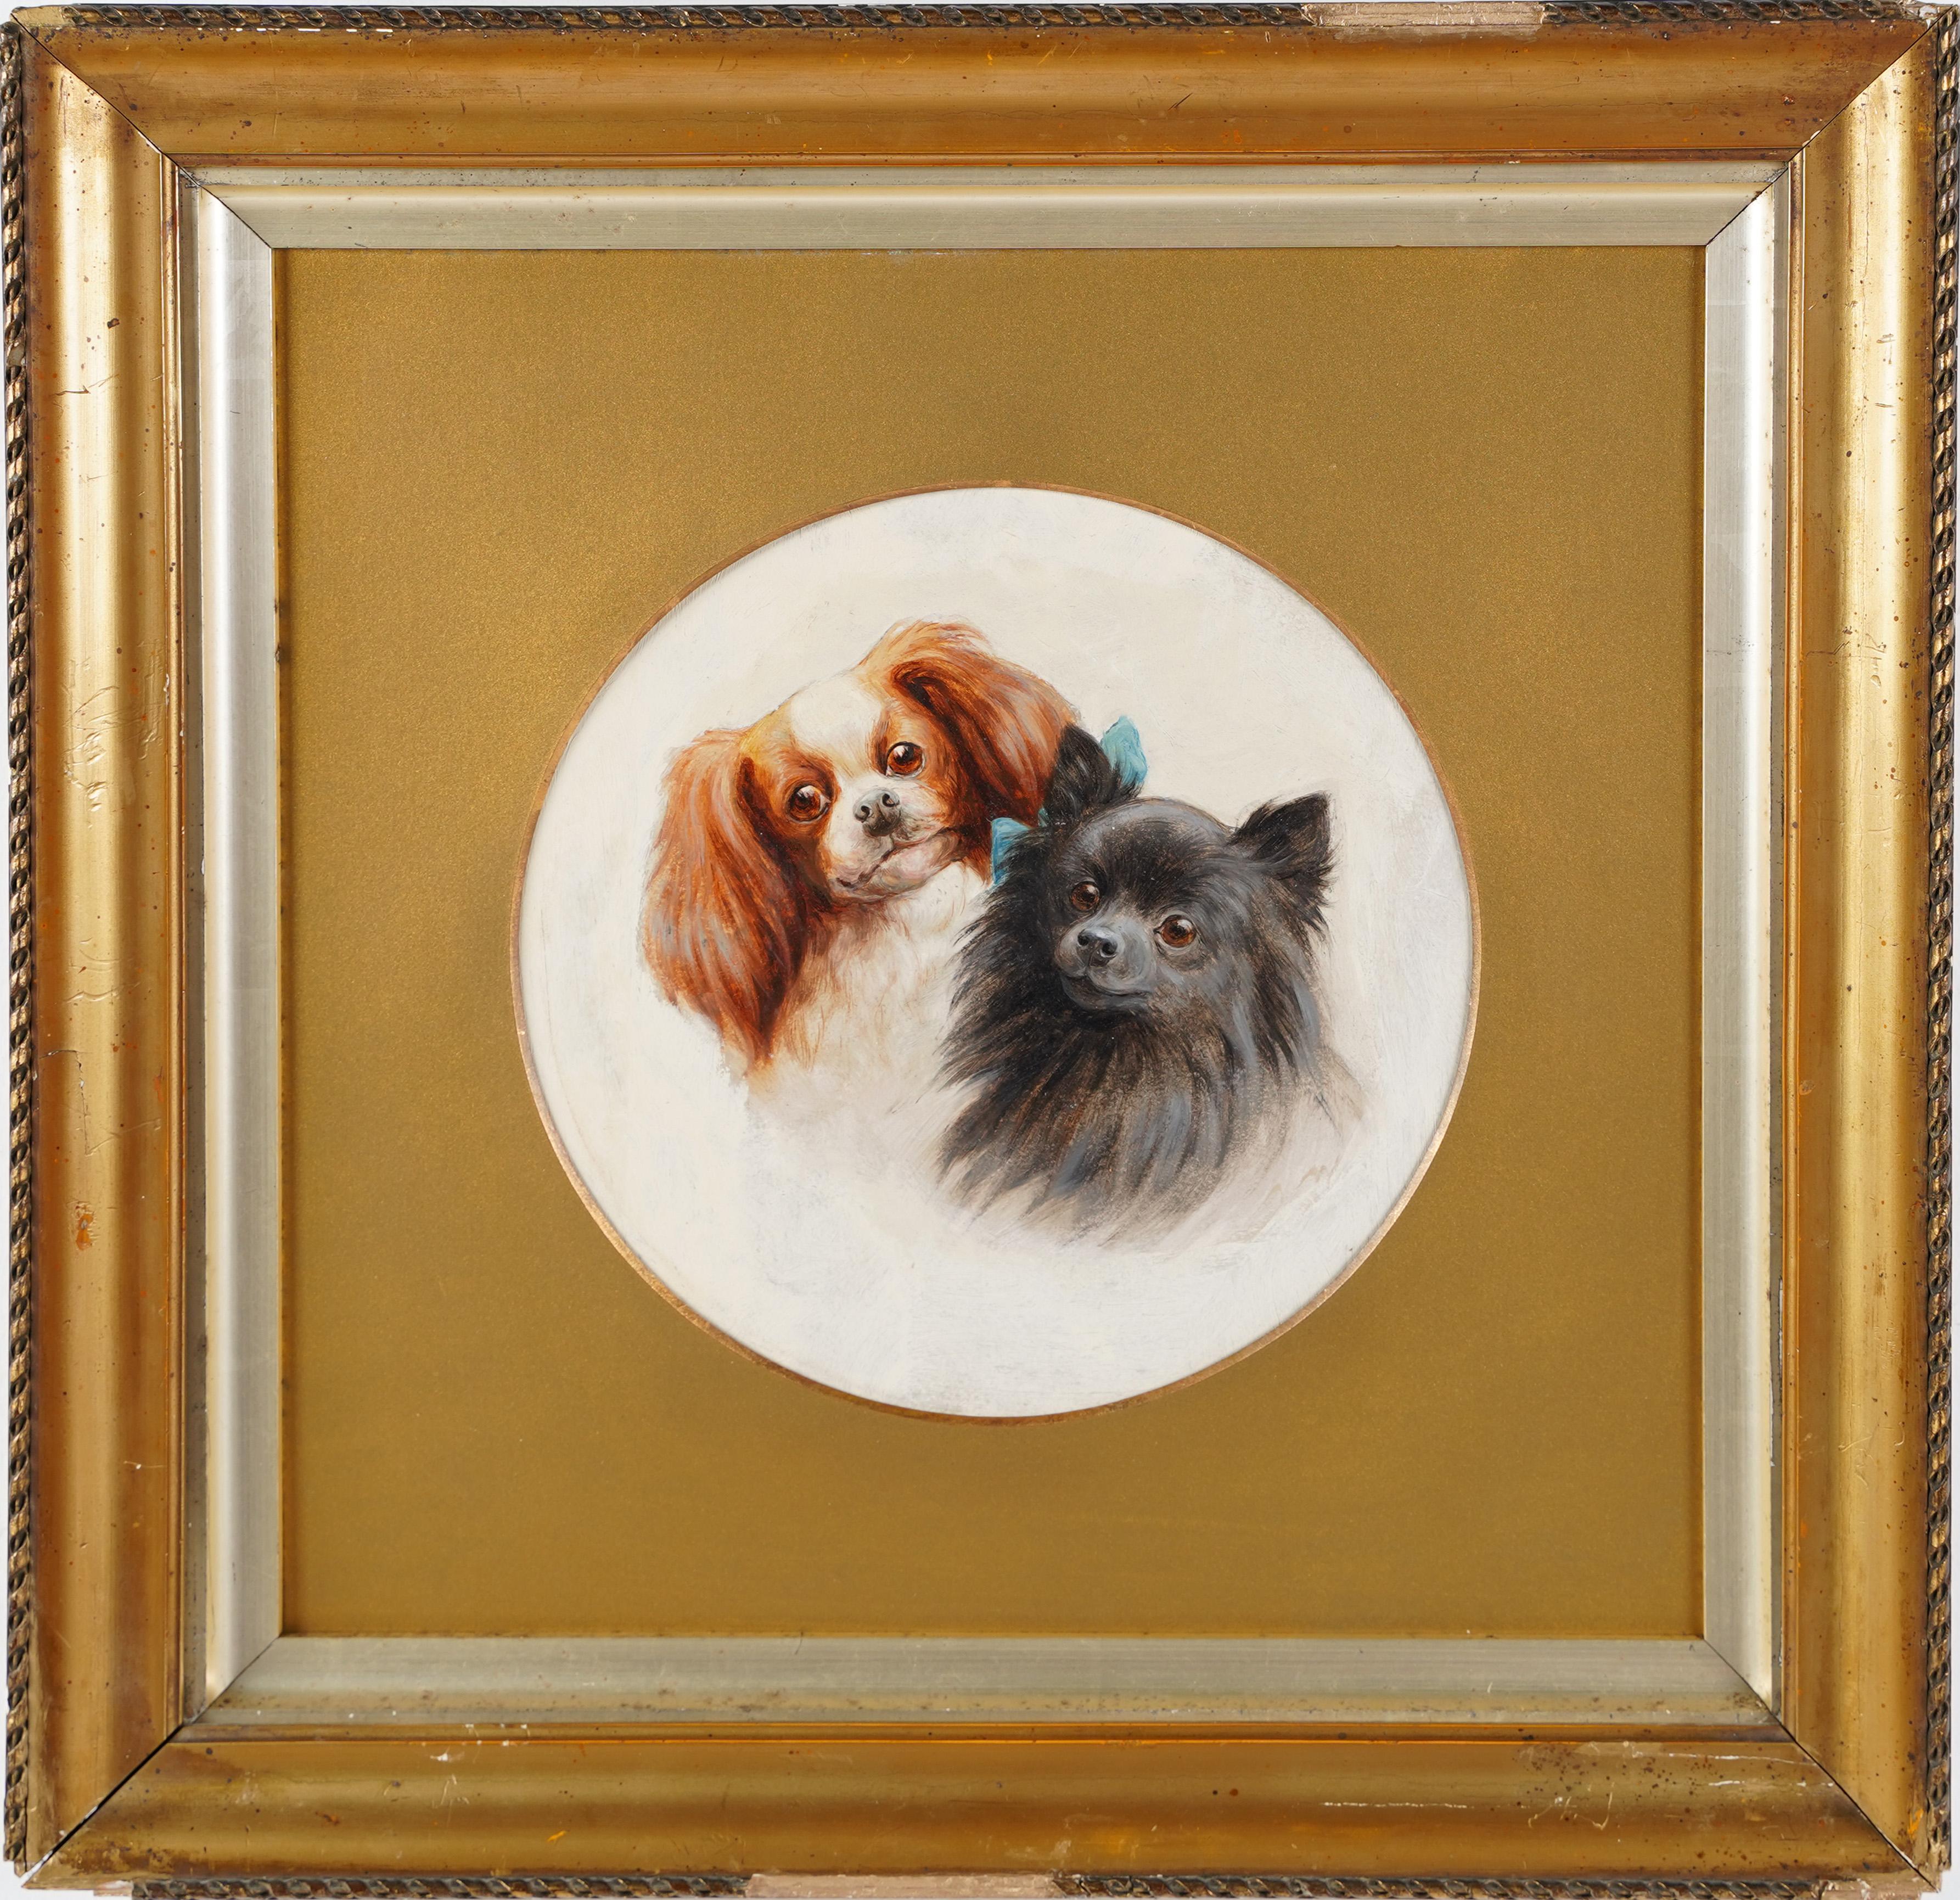 Unknown Interior Painting -  Antique American School Show Dog Portrait Framed 19th Century Oil Painting